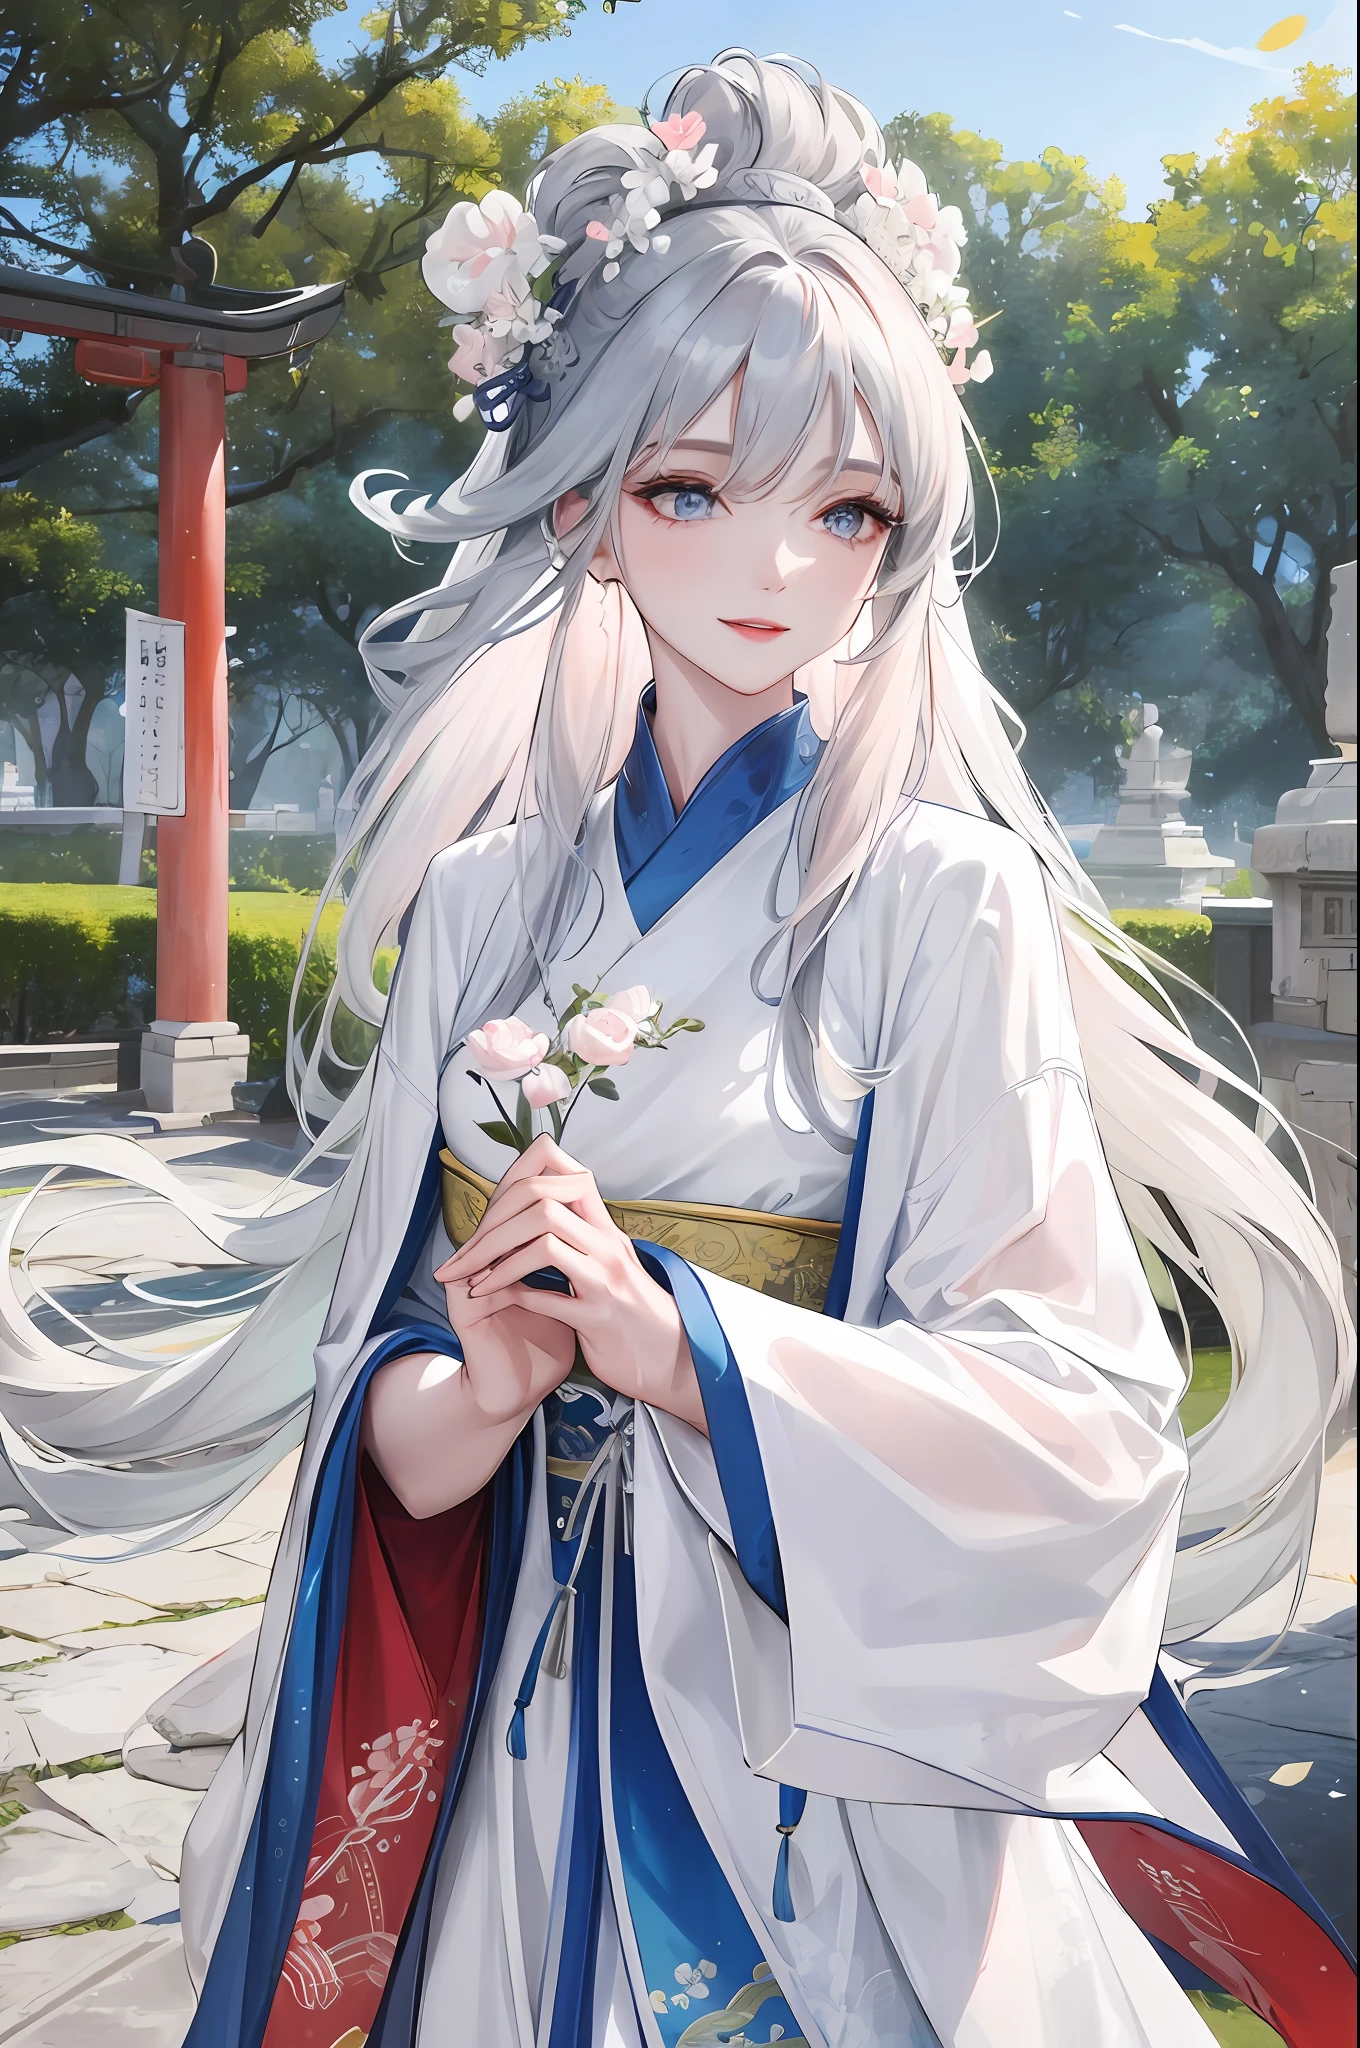 Masterpiece, Superb Piece, Daytime, Outdoor, Festival, Celebration, 1 Woman, Solo, Mature Woman, Mature, Chinese Style, Ancient China, Sister, Royal Sister, Happy, Smile, Silver White Long Haired Woman, Gray Blue Eyes, Shawl, Bangs, Pale Pink Lips, White Clothes,